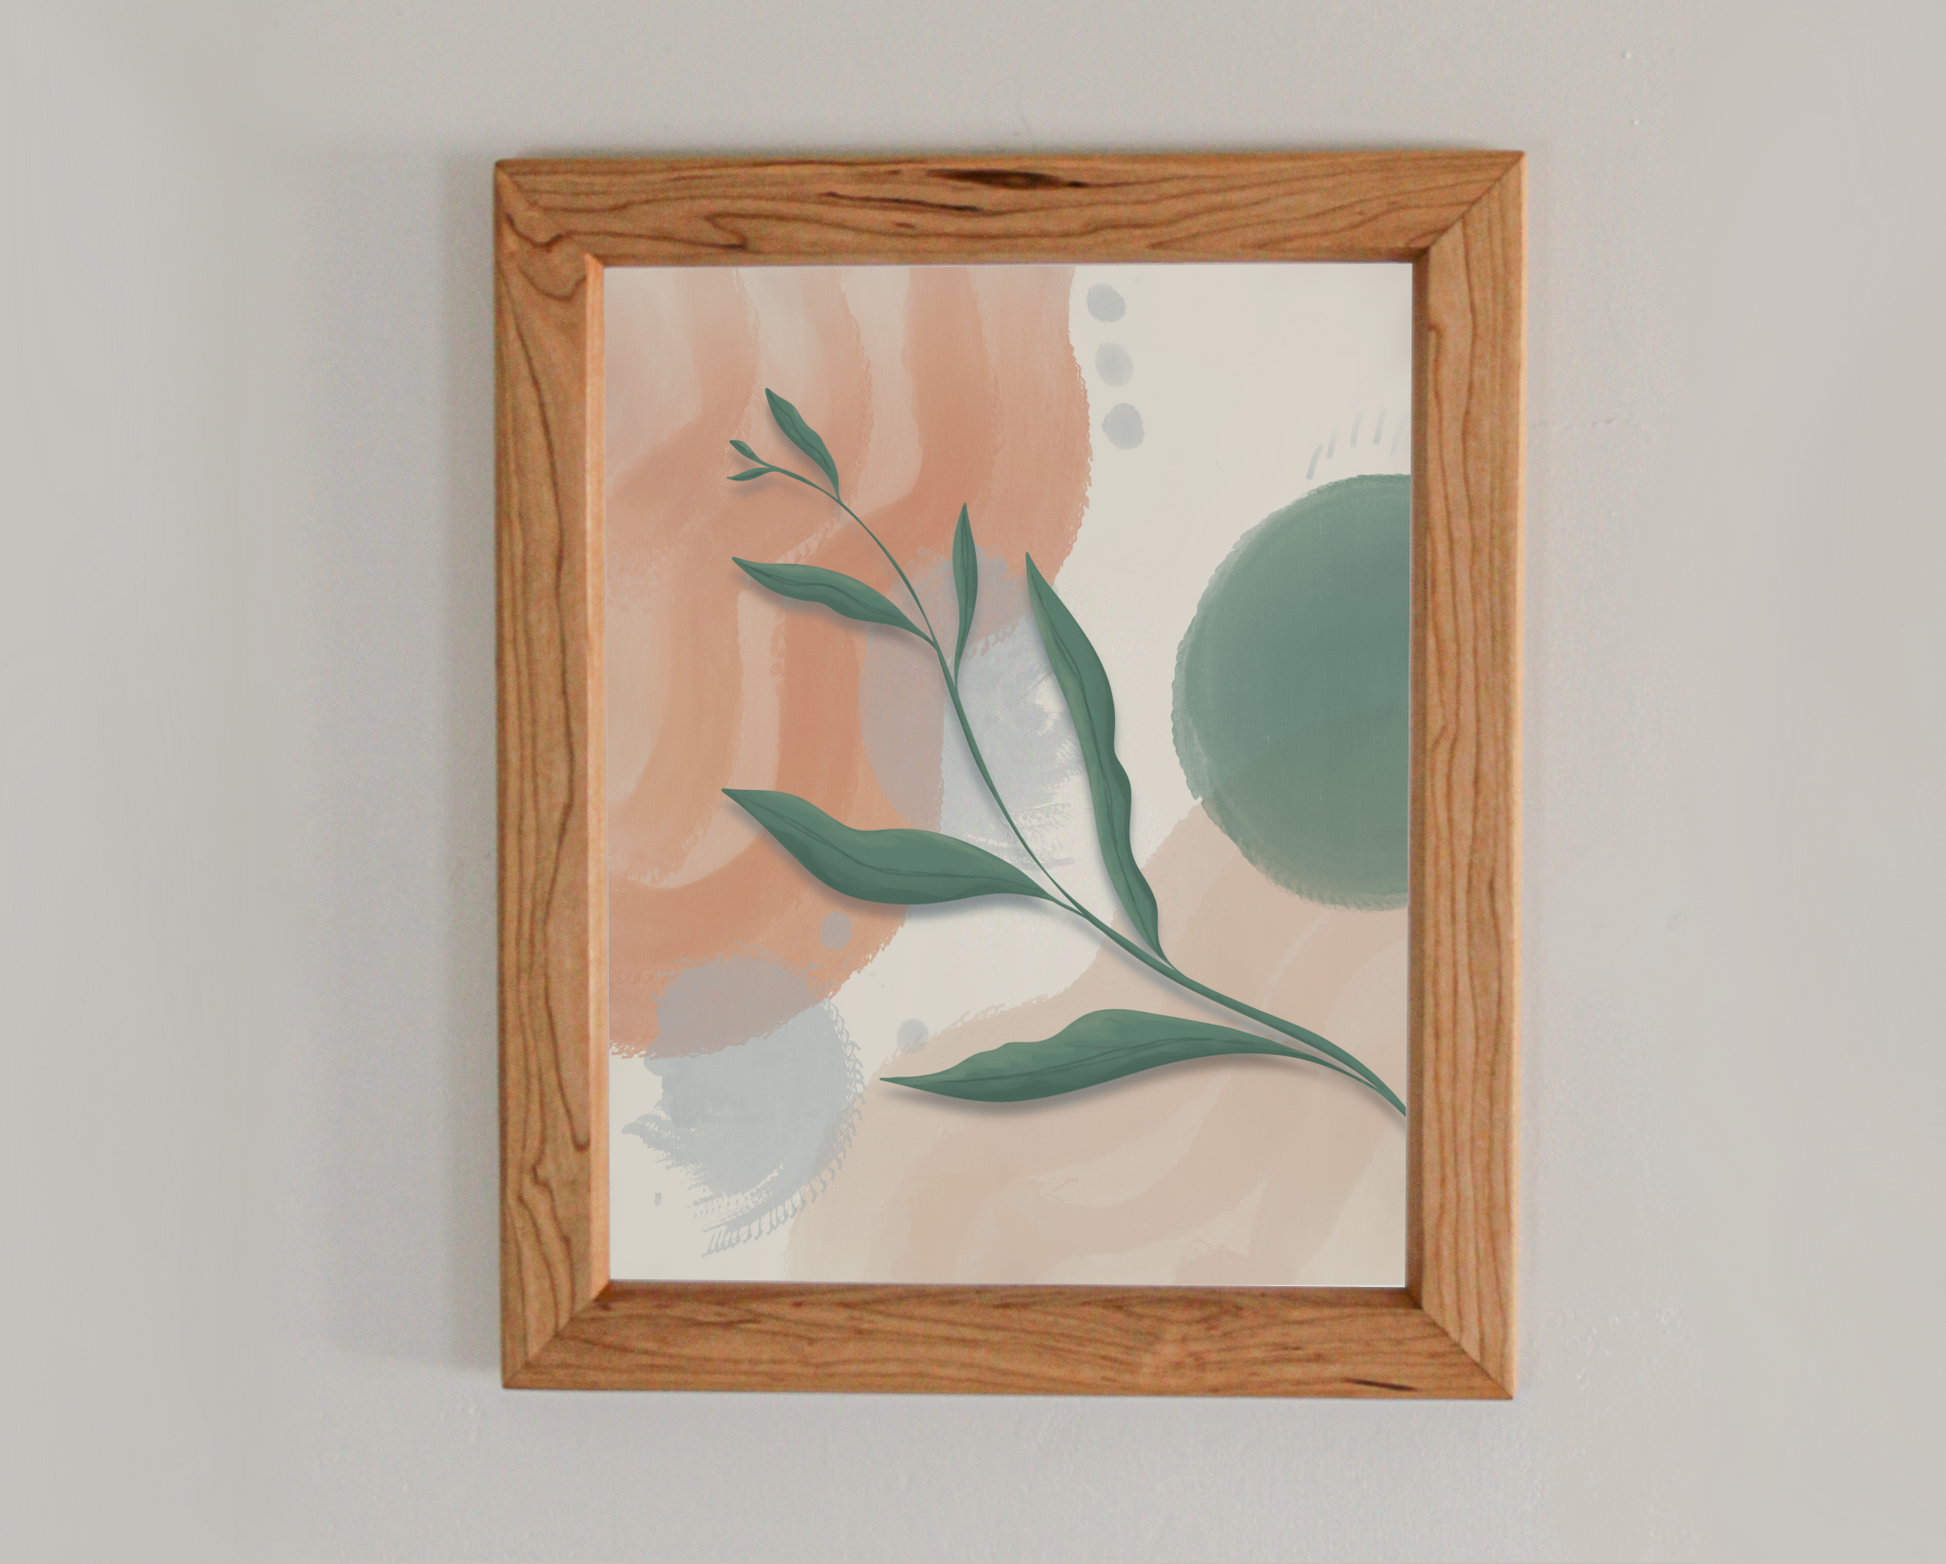 Abstract art print of botanicals in a cherry hardwood frame